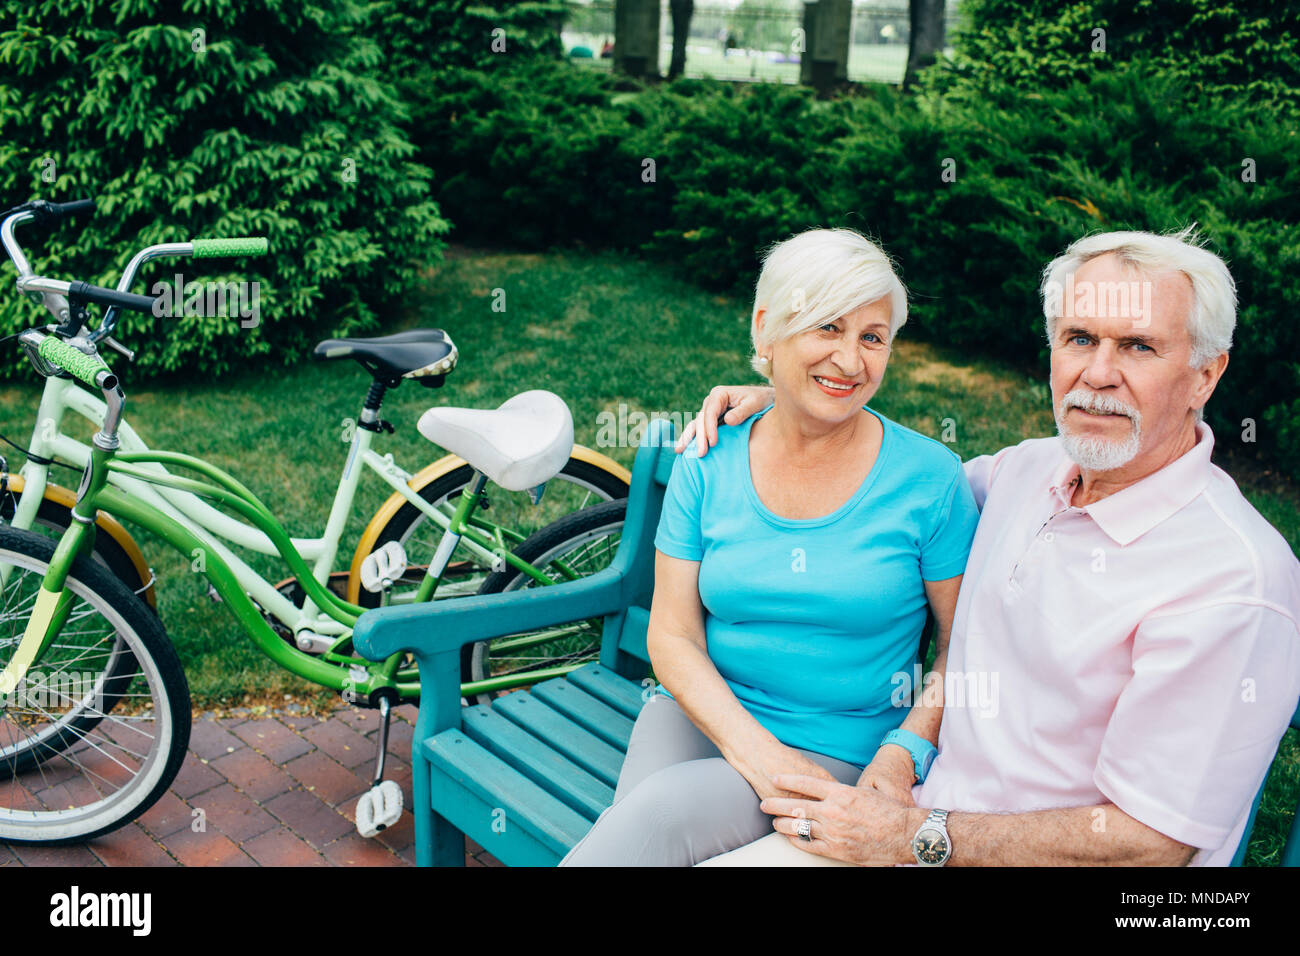 portrait of an elderly couple sitting in a city park Stock Photo